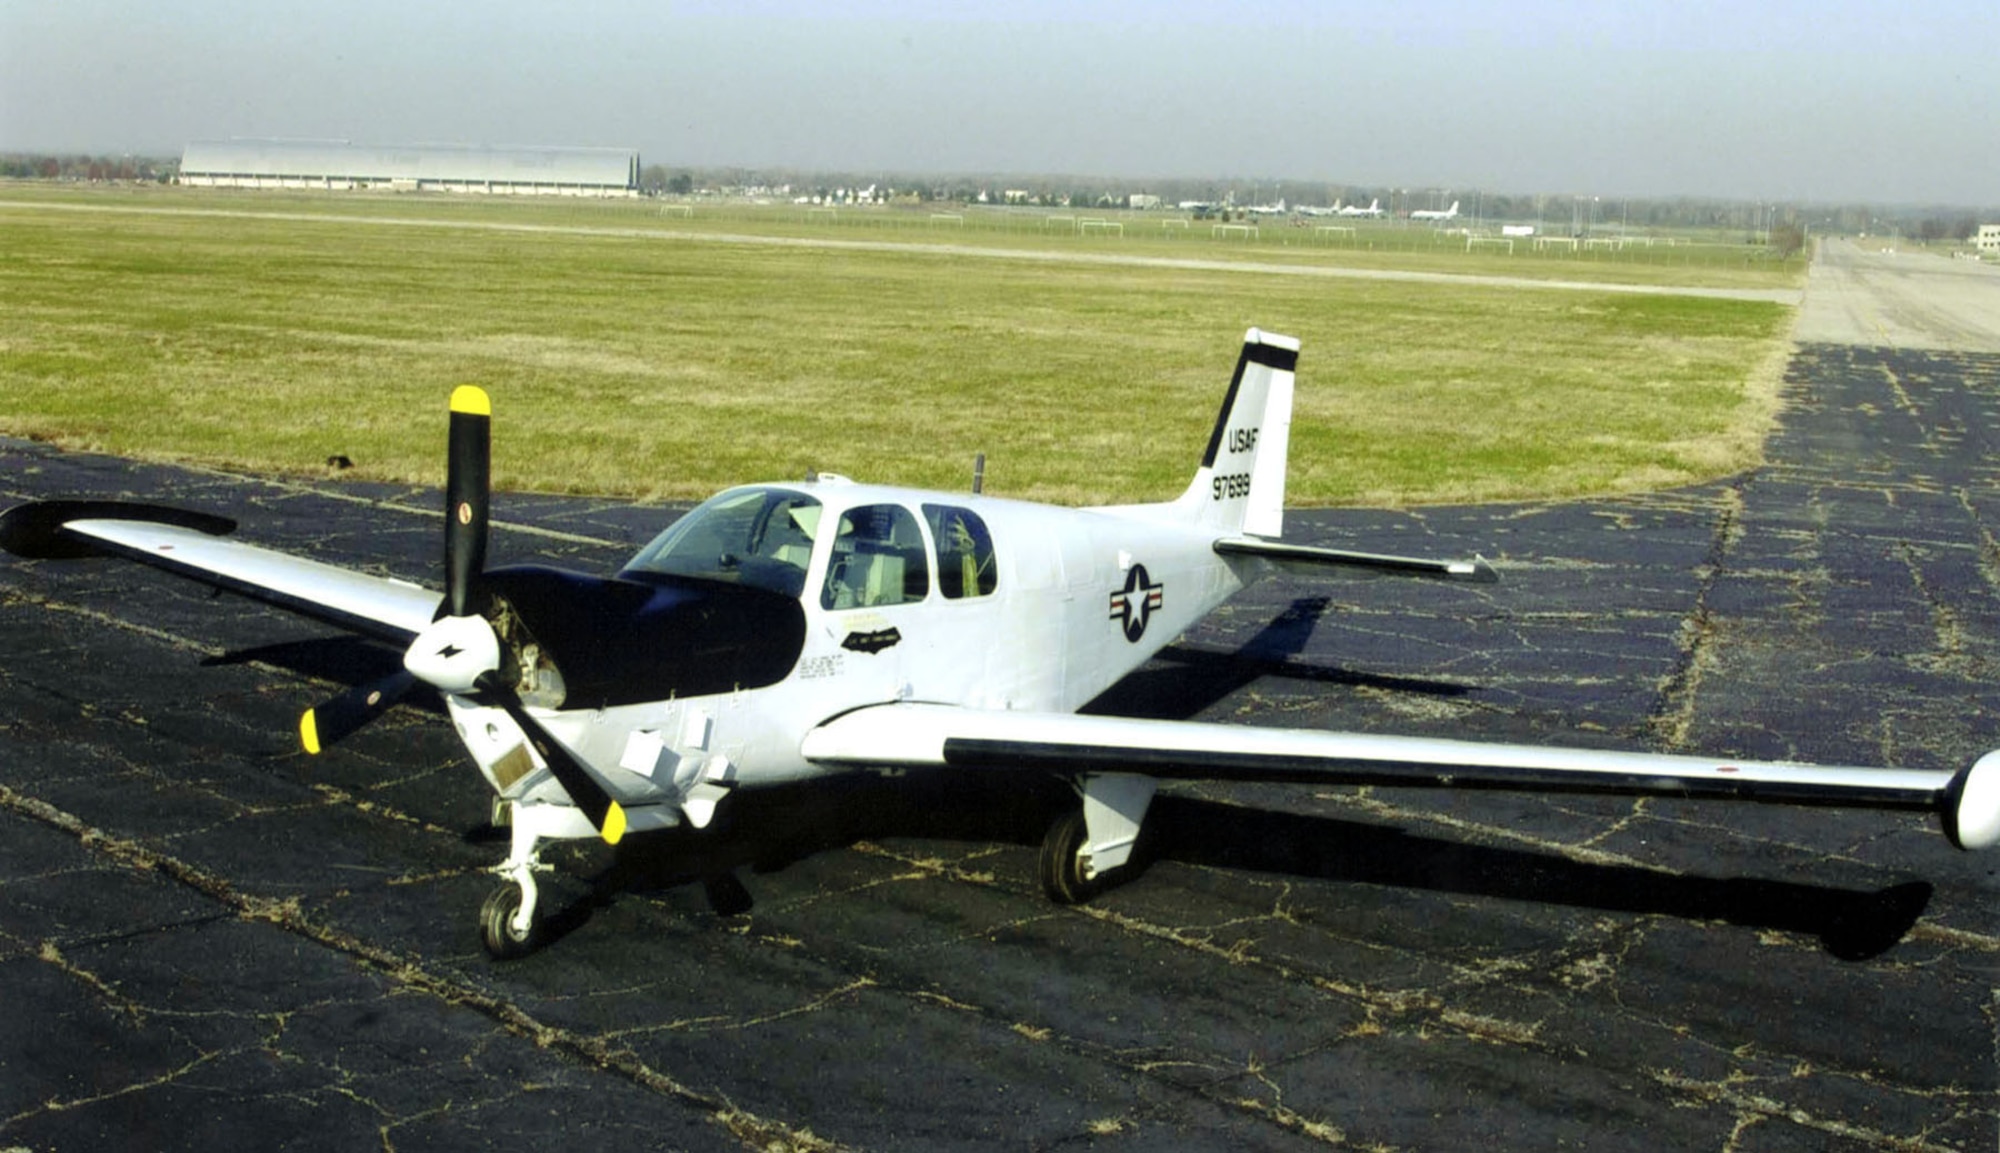 DAYTON, Ohio -- Beech QU-22B at the National Museum of the United States Air Force. (U.S. Air Force photo)